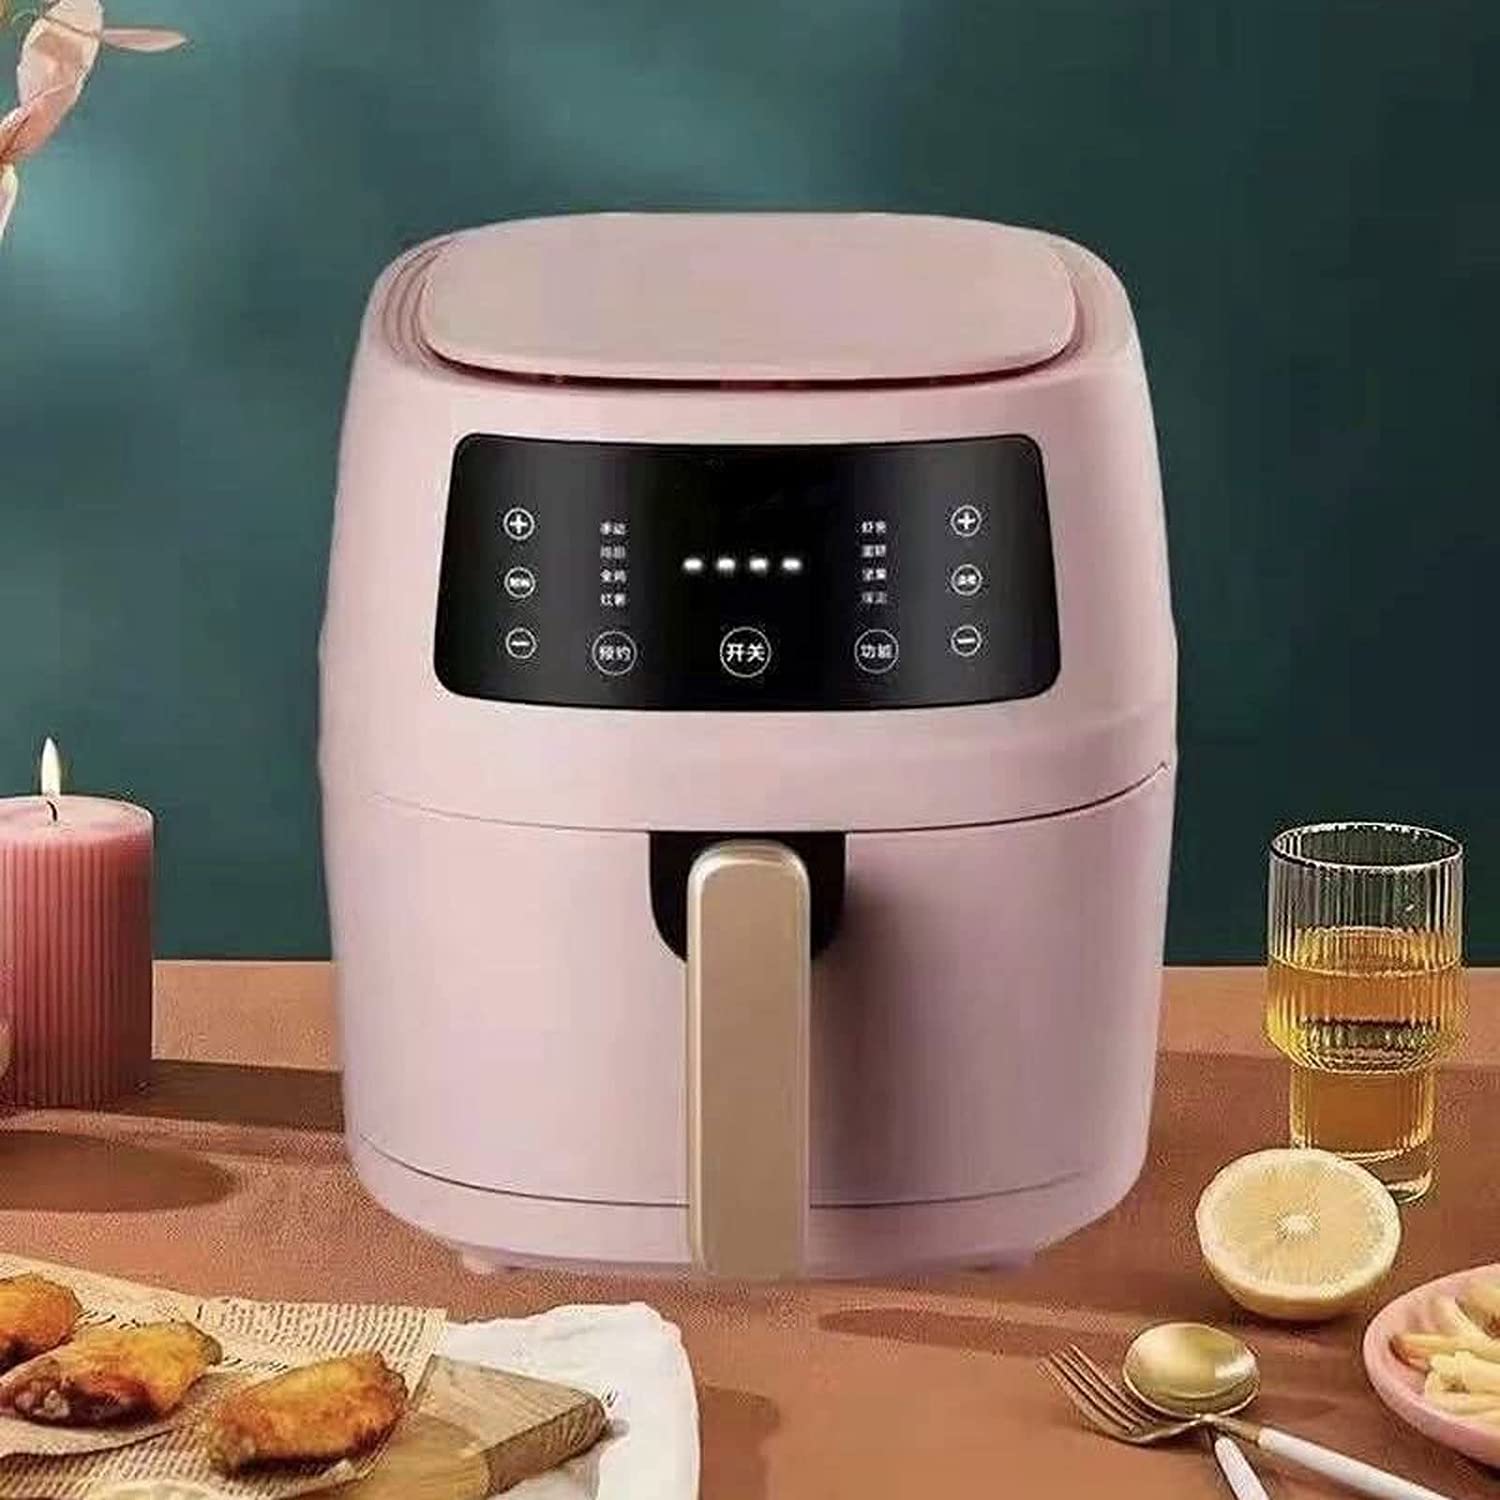 YAARN Air Fryer Air Oven Frier Digital Display Multifunctional Household appliances air Fryer Kitchen Smart Oven Cooker Home Cooking (Color : Pink, Size : JP)